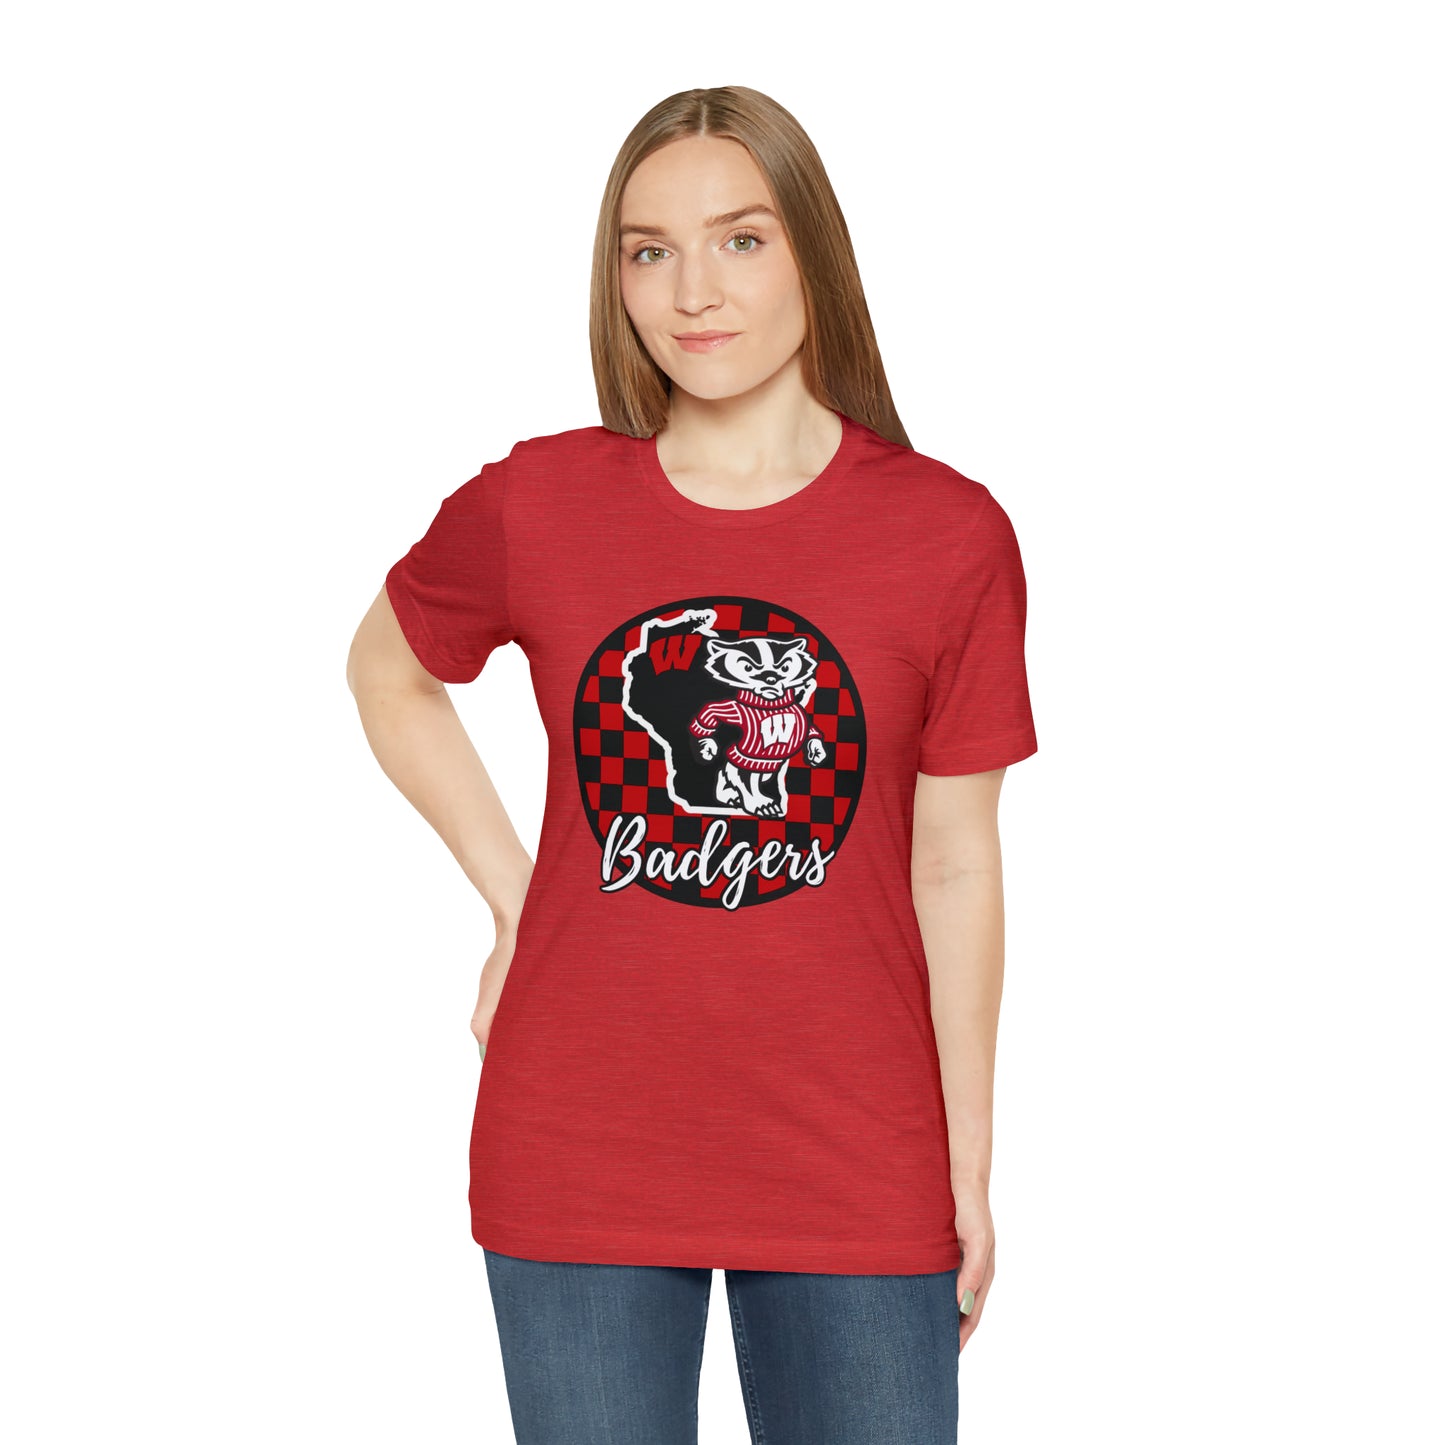 Wisconsin Badgers Checkered Circle